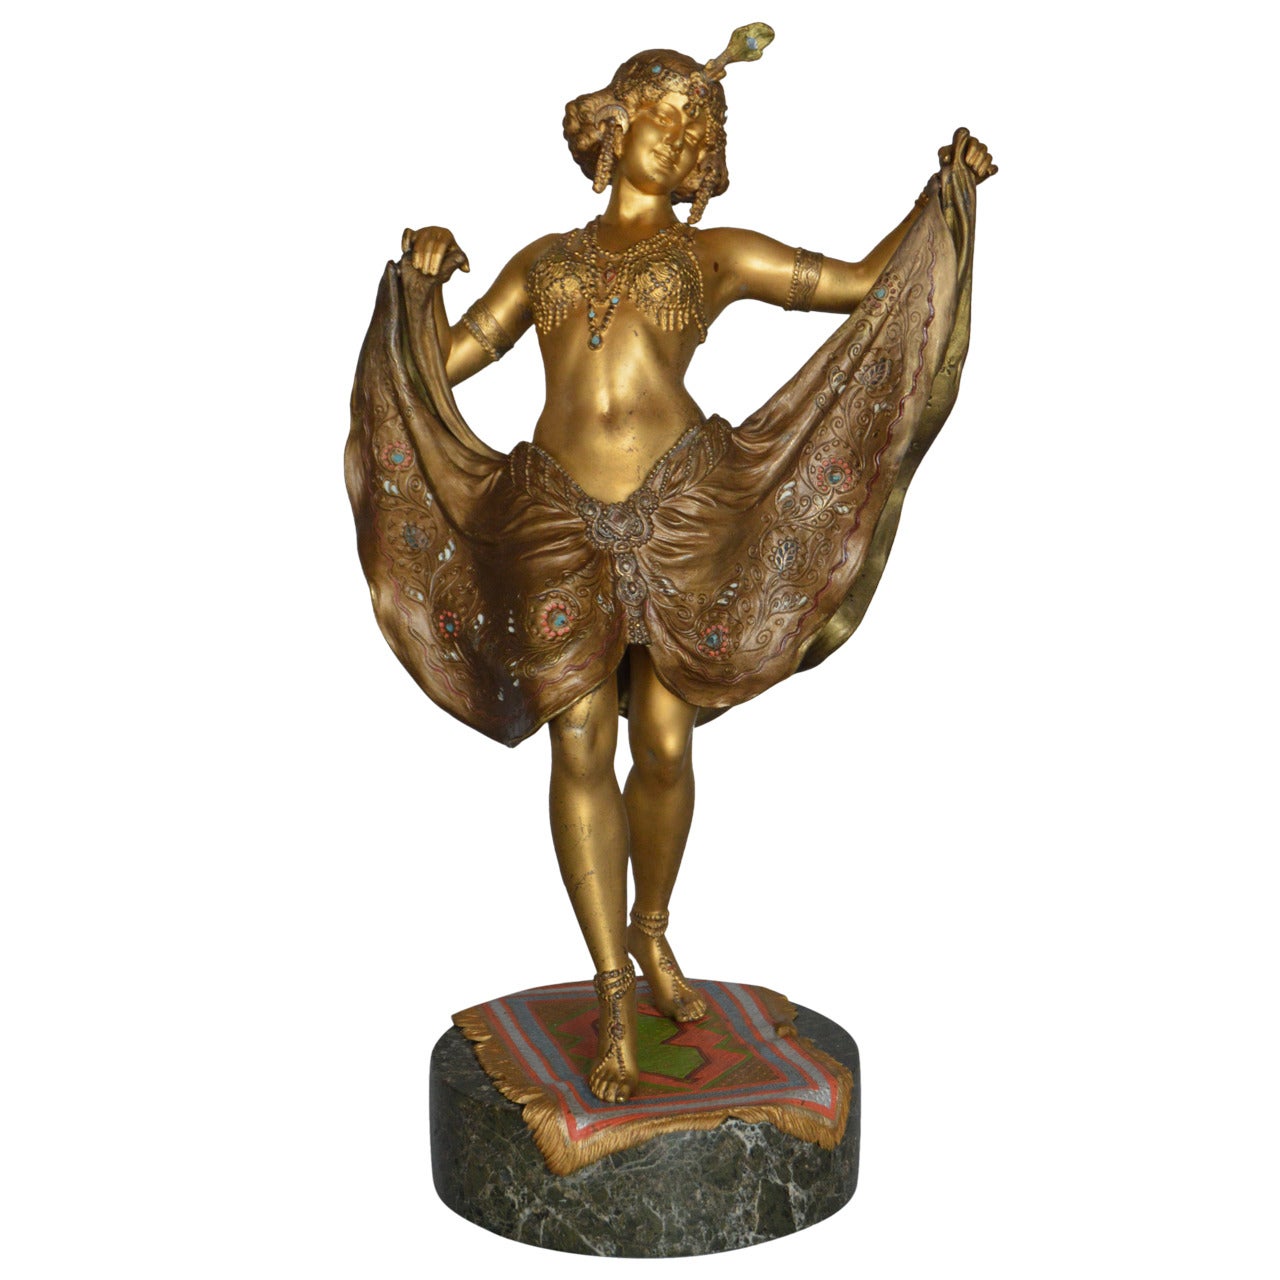 Windy Day, Cold Painted Bronze Sculpture by Bergman For Sale